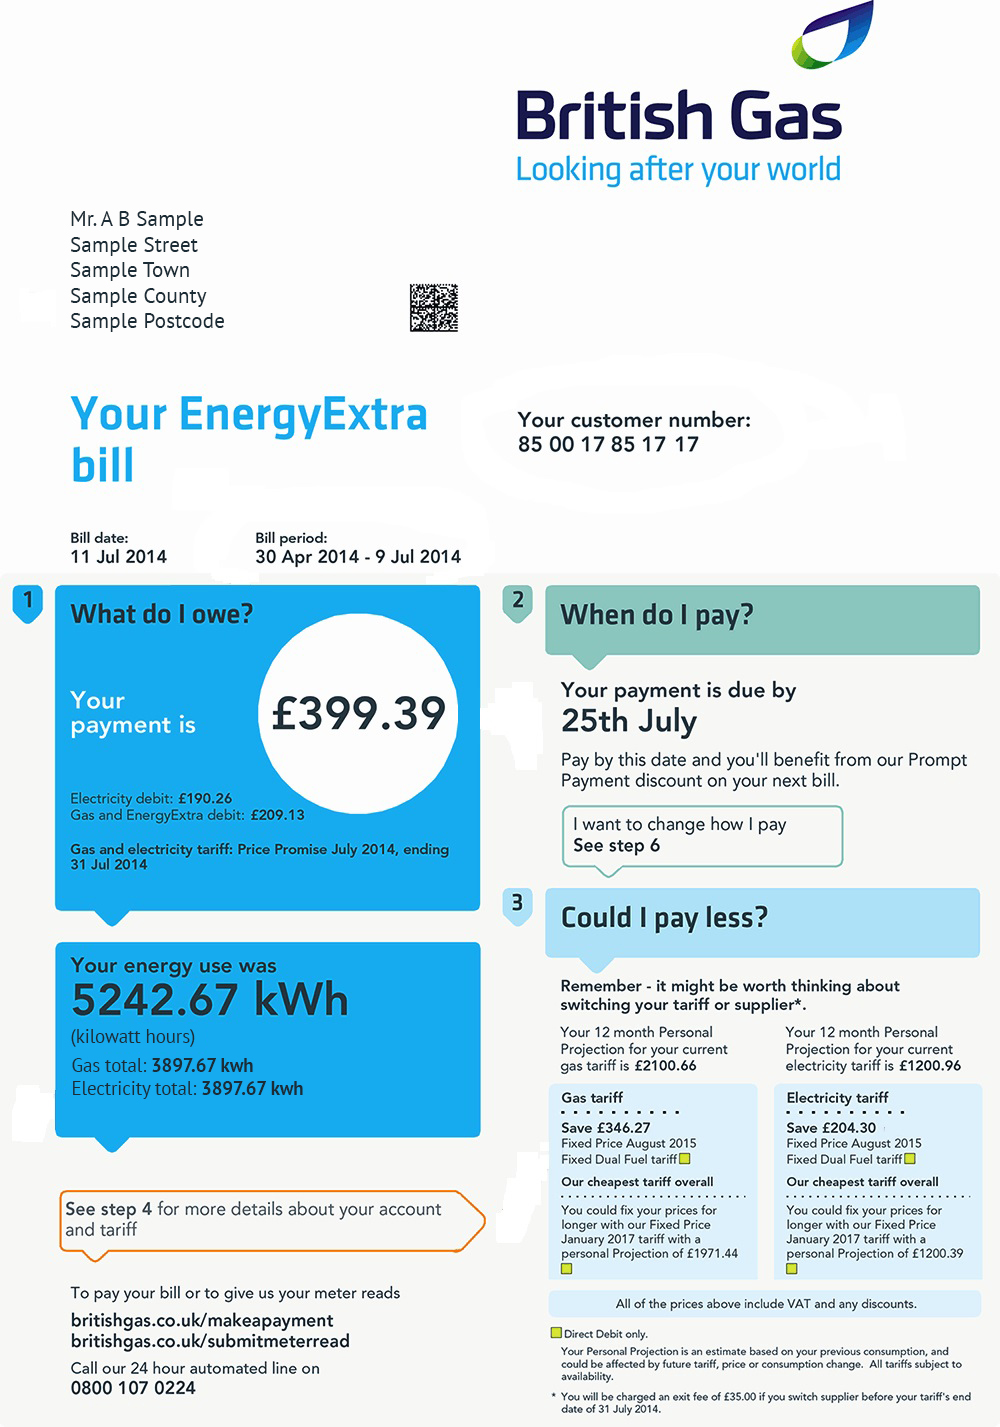 Meeting Lying Expressly British Gas's Gas &amp; Electricity Bill Explained | Free Price Compare